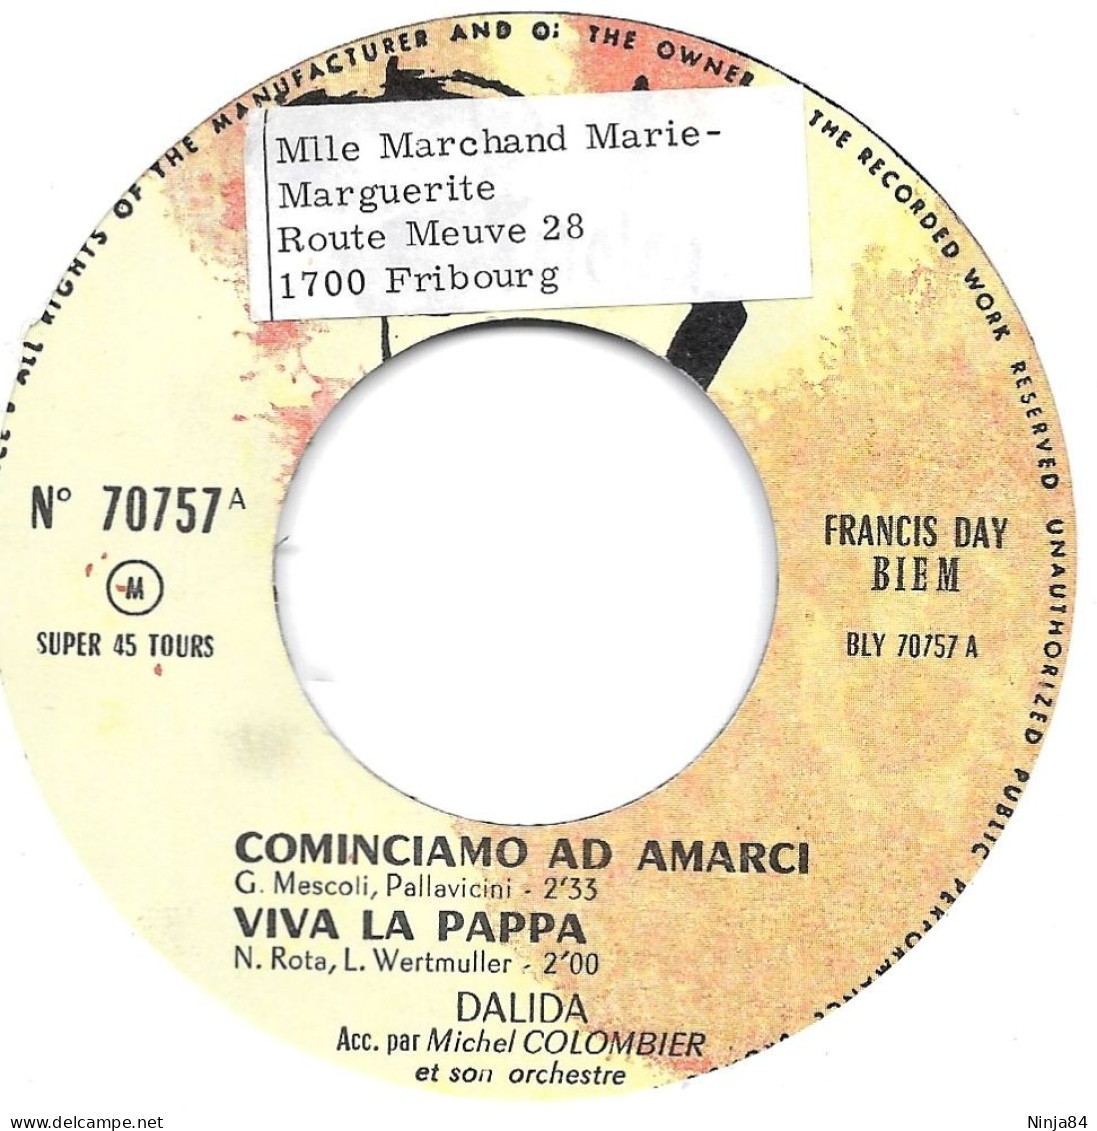 EP 45 RPM (7") Dalida  "  Canta In Italiano  " - Other - French Music